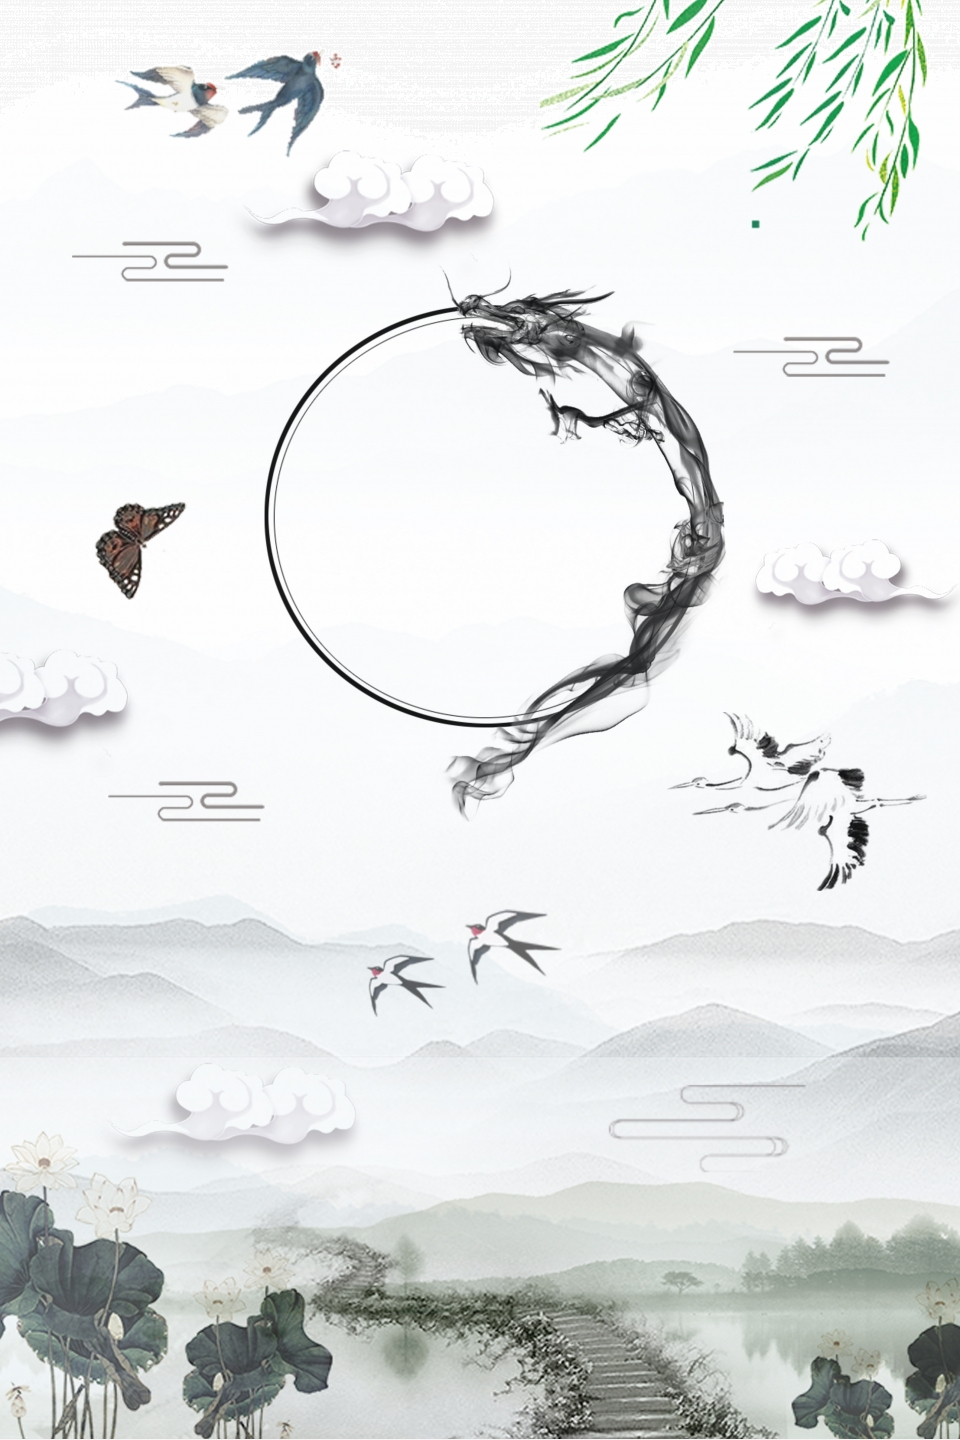 Qingming Festival Gray Green Minimalist Poster Background with Ching Ming 2021